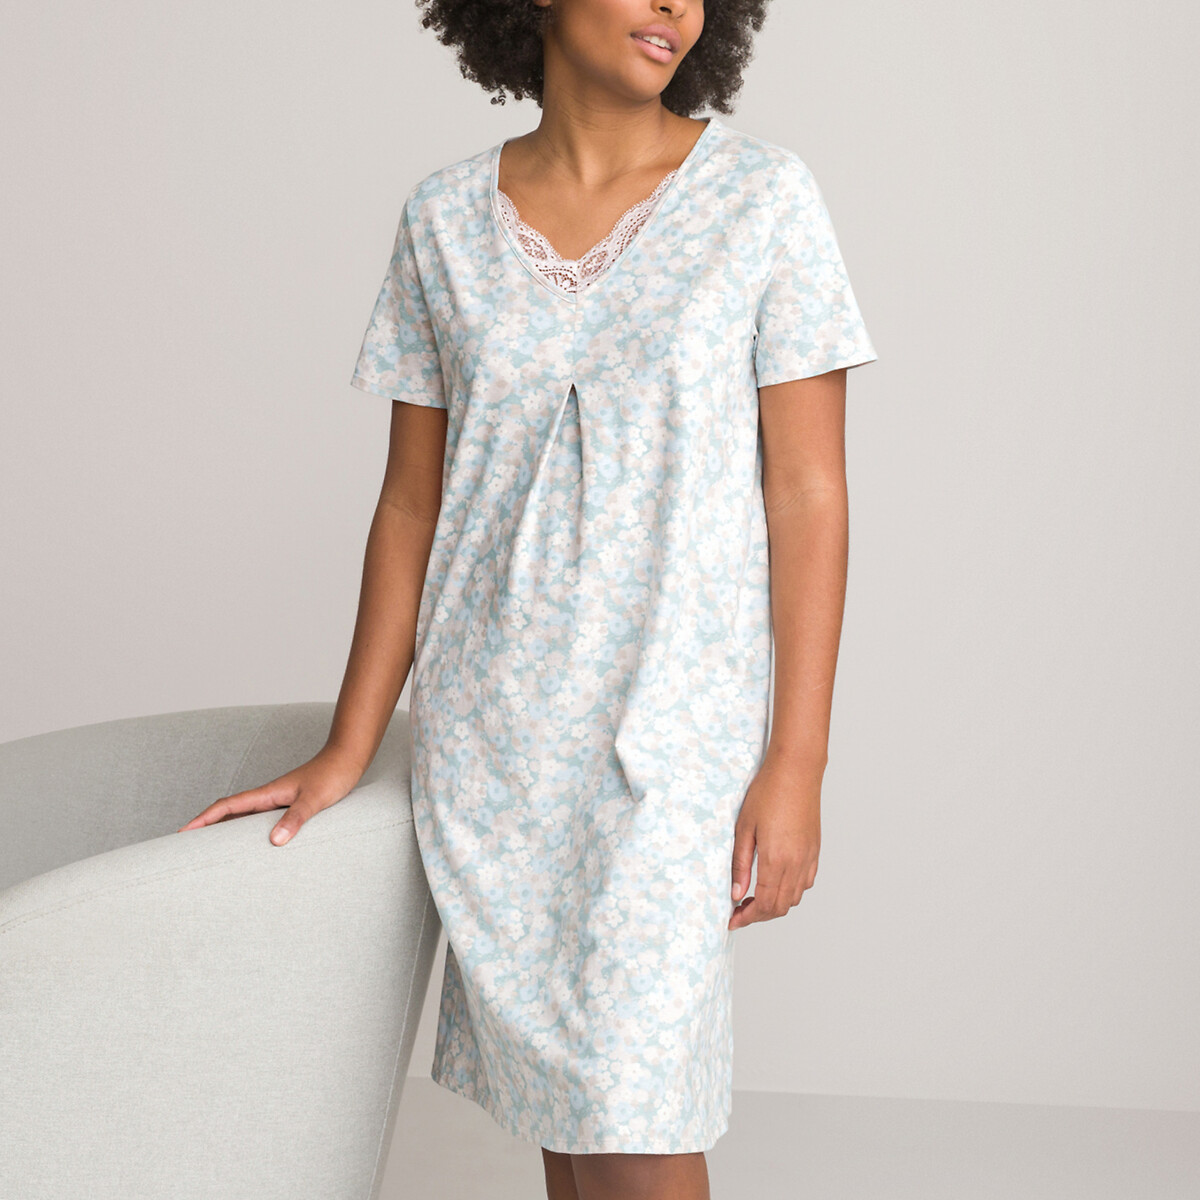 Floral Print Cotton Nightdress with Lace Detail